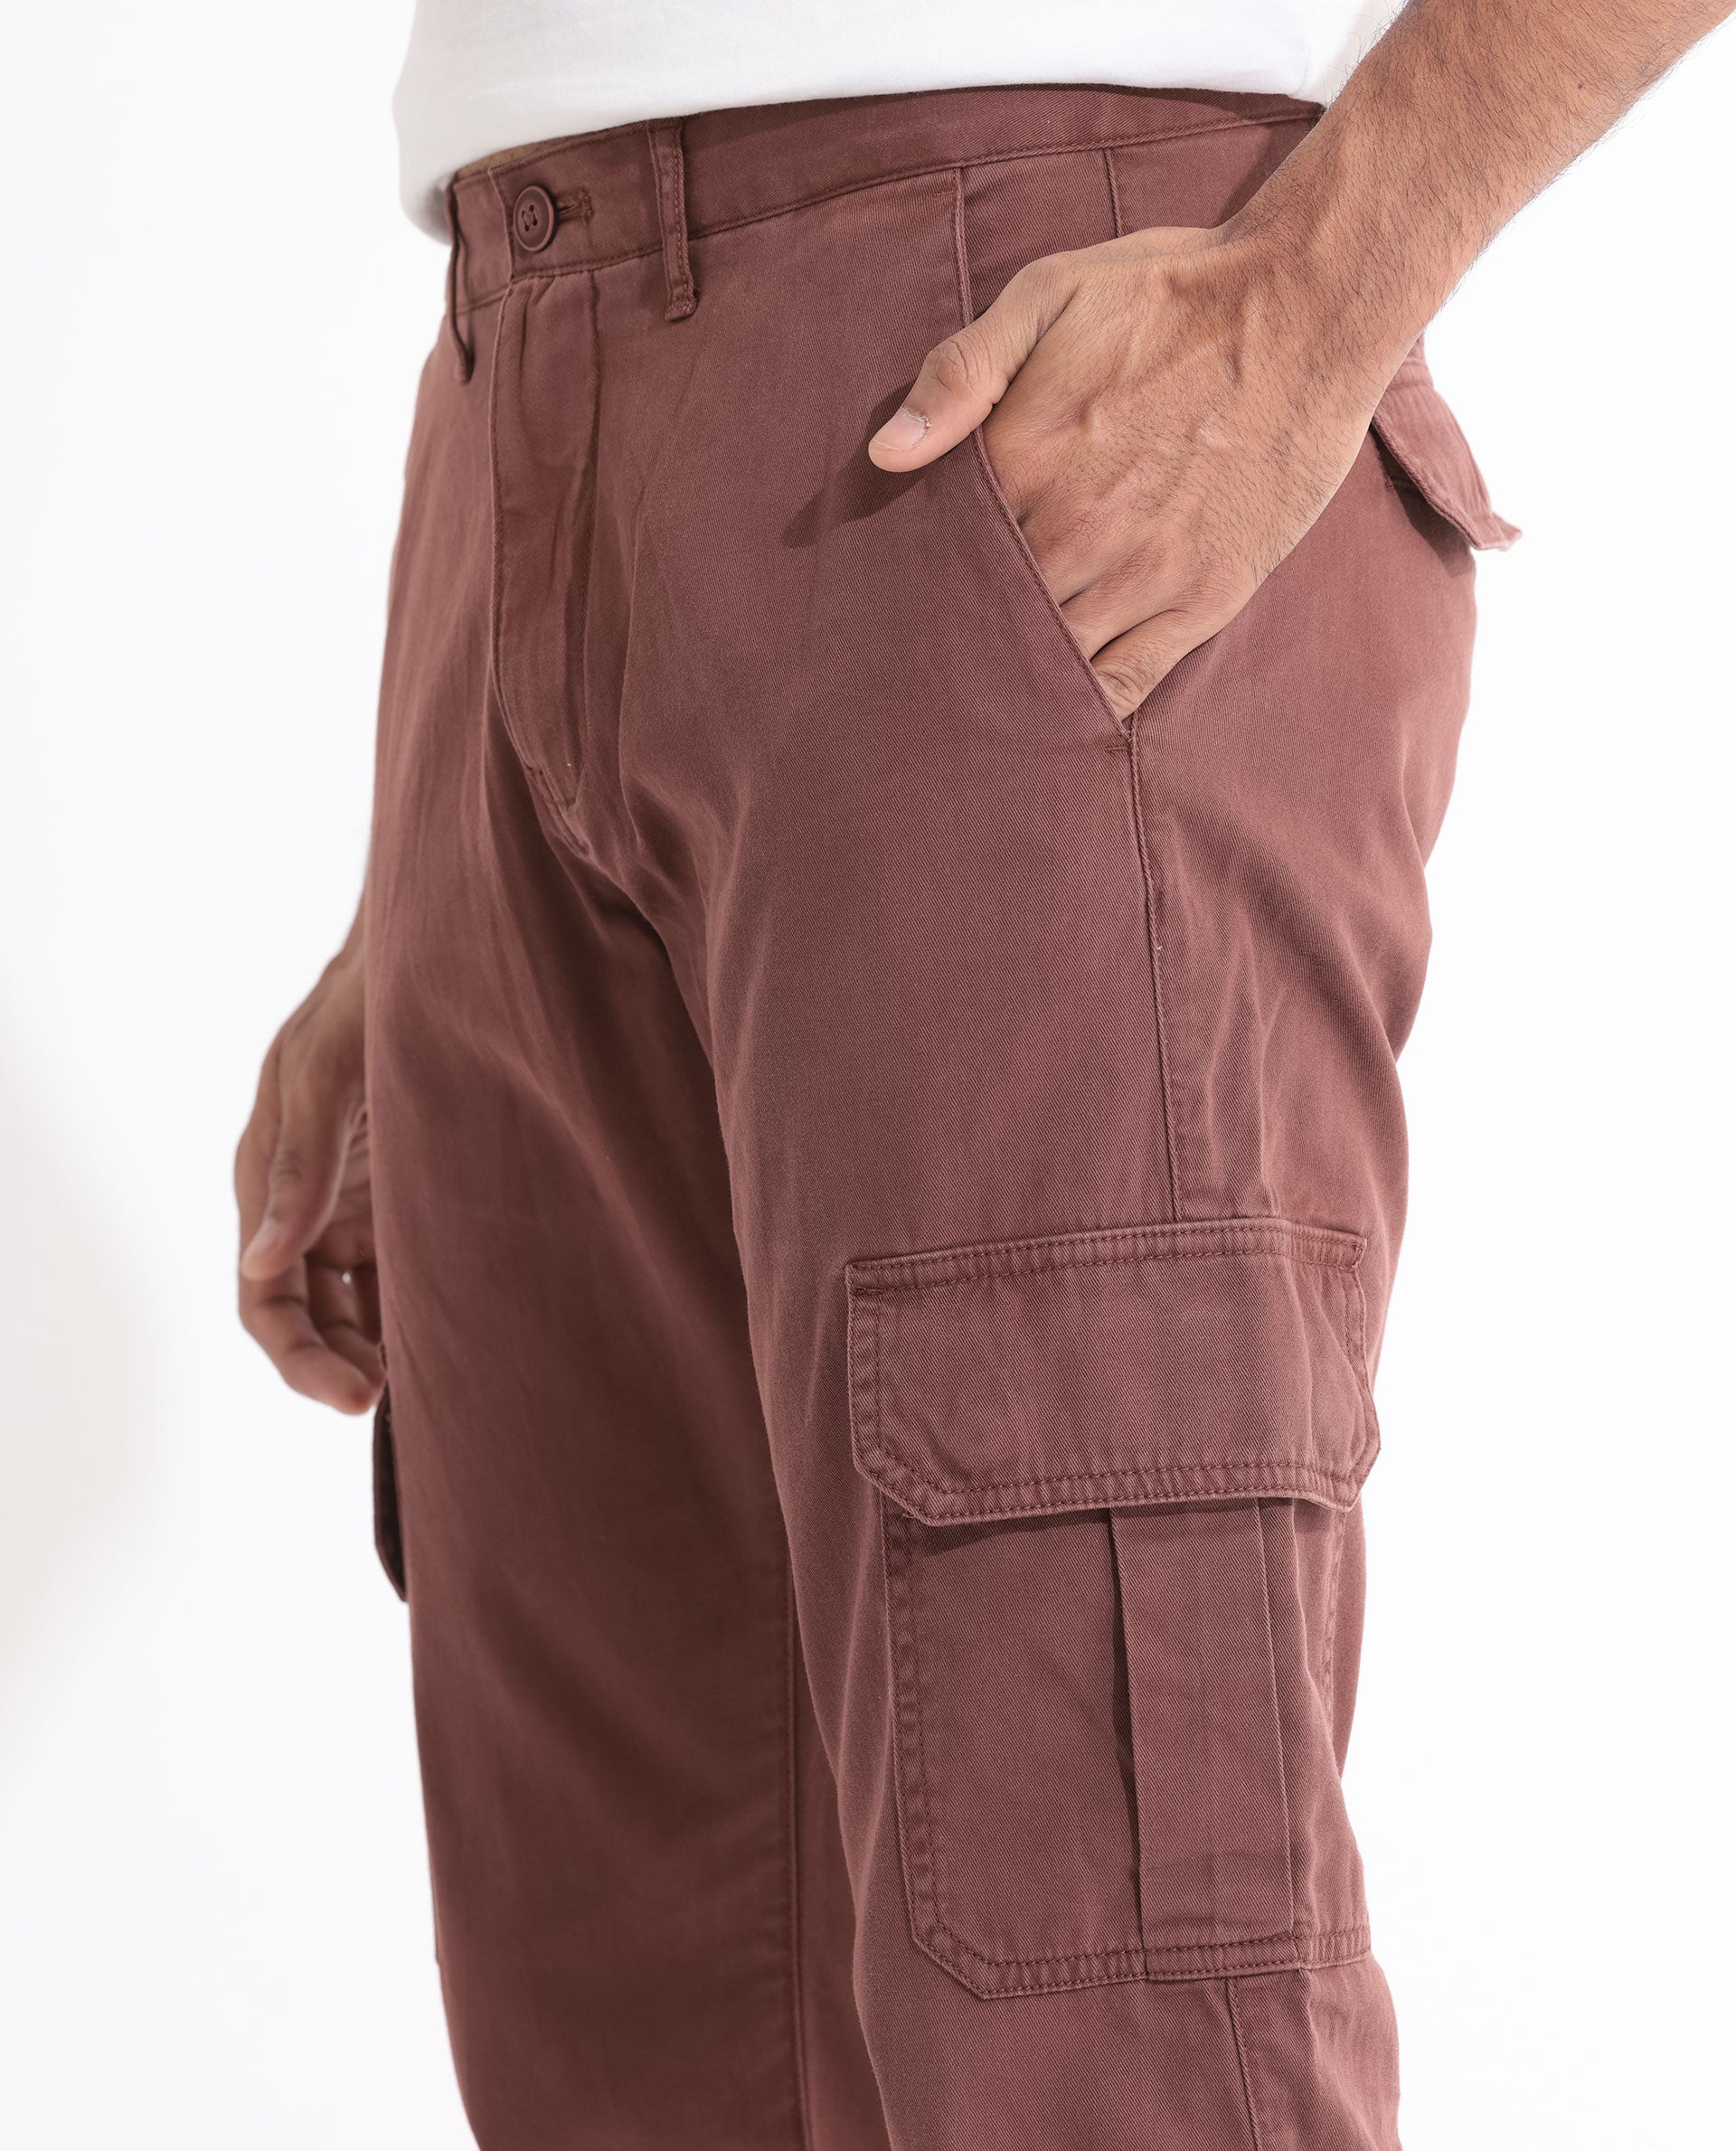 Acne Studios - Cargo trousers - Olive green